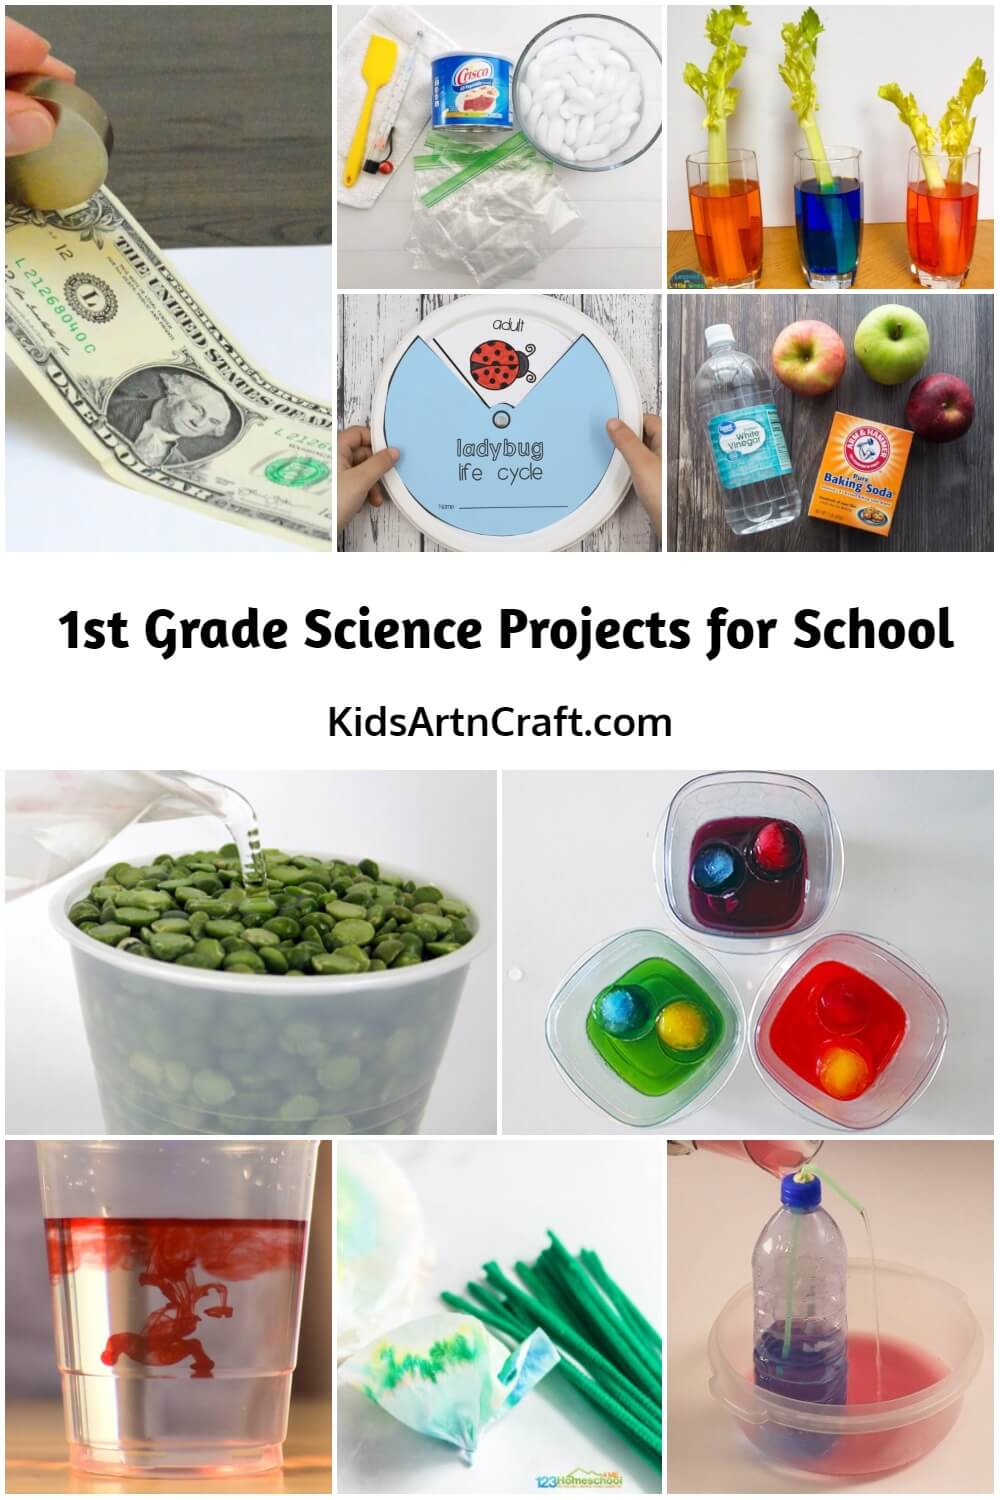 1st Grade Science Projects for School